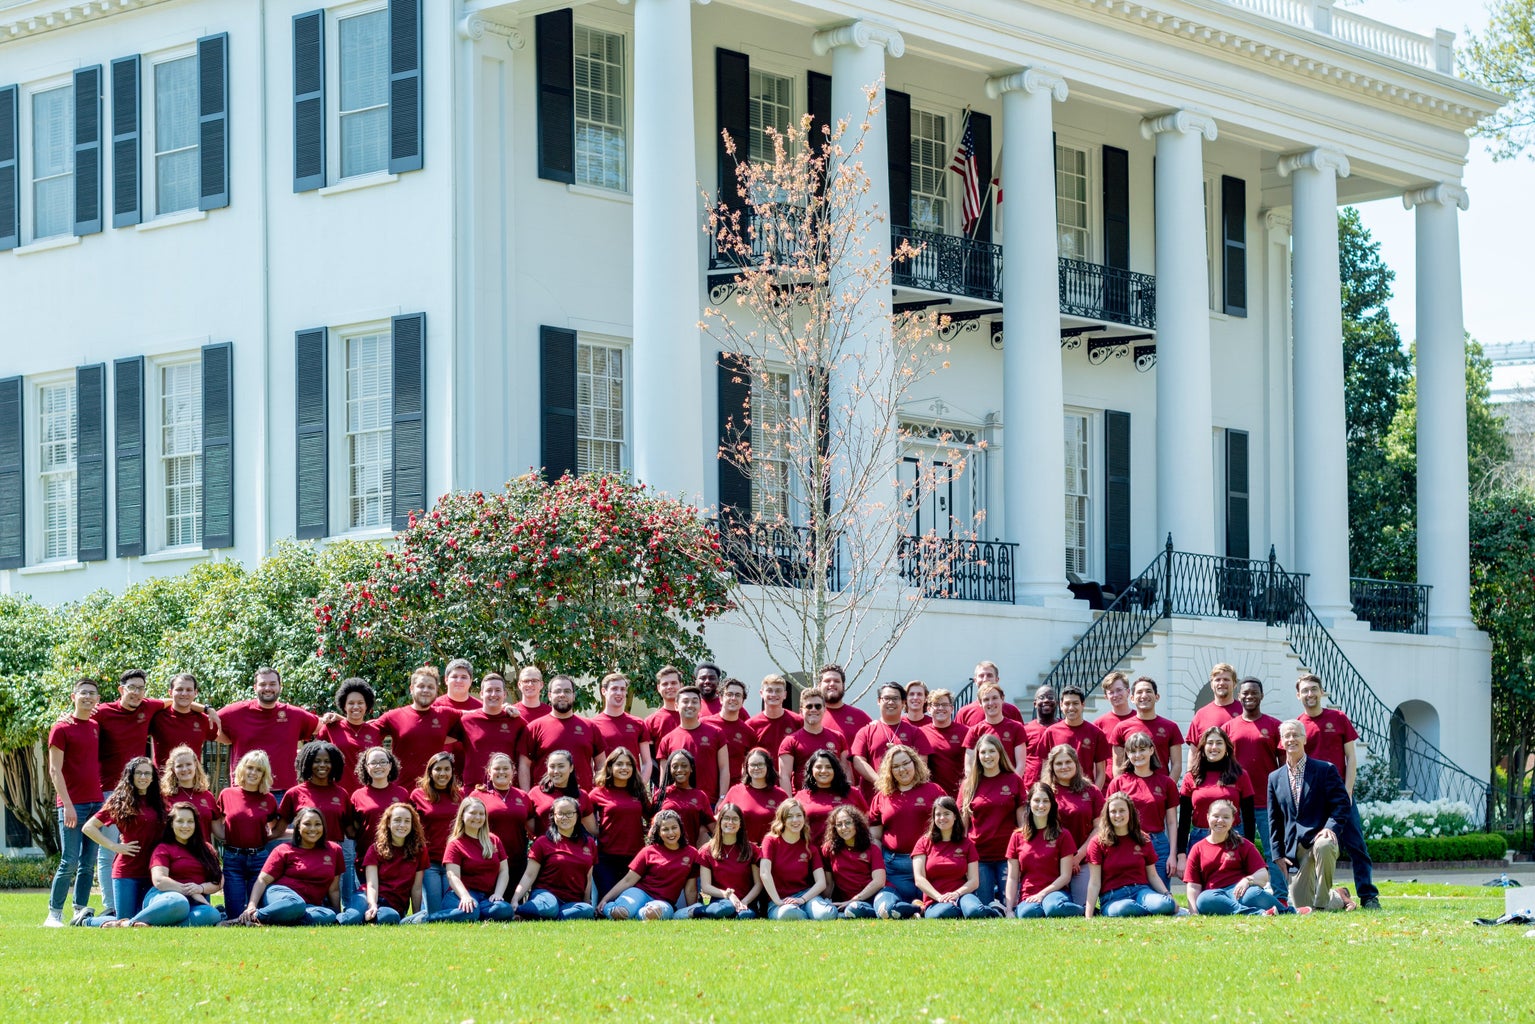 People in garnet shirts posing in front of a white building